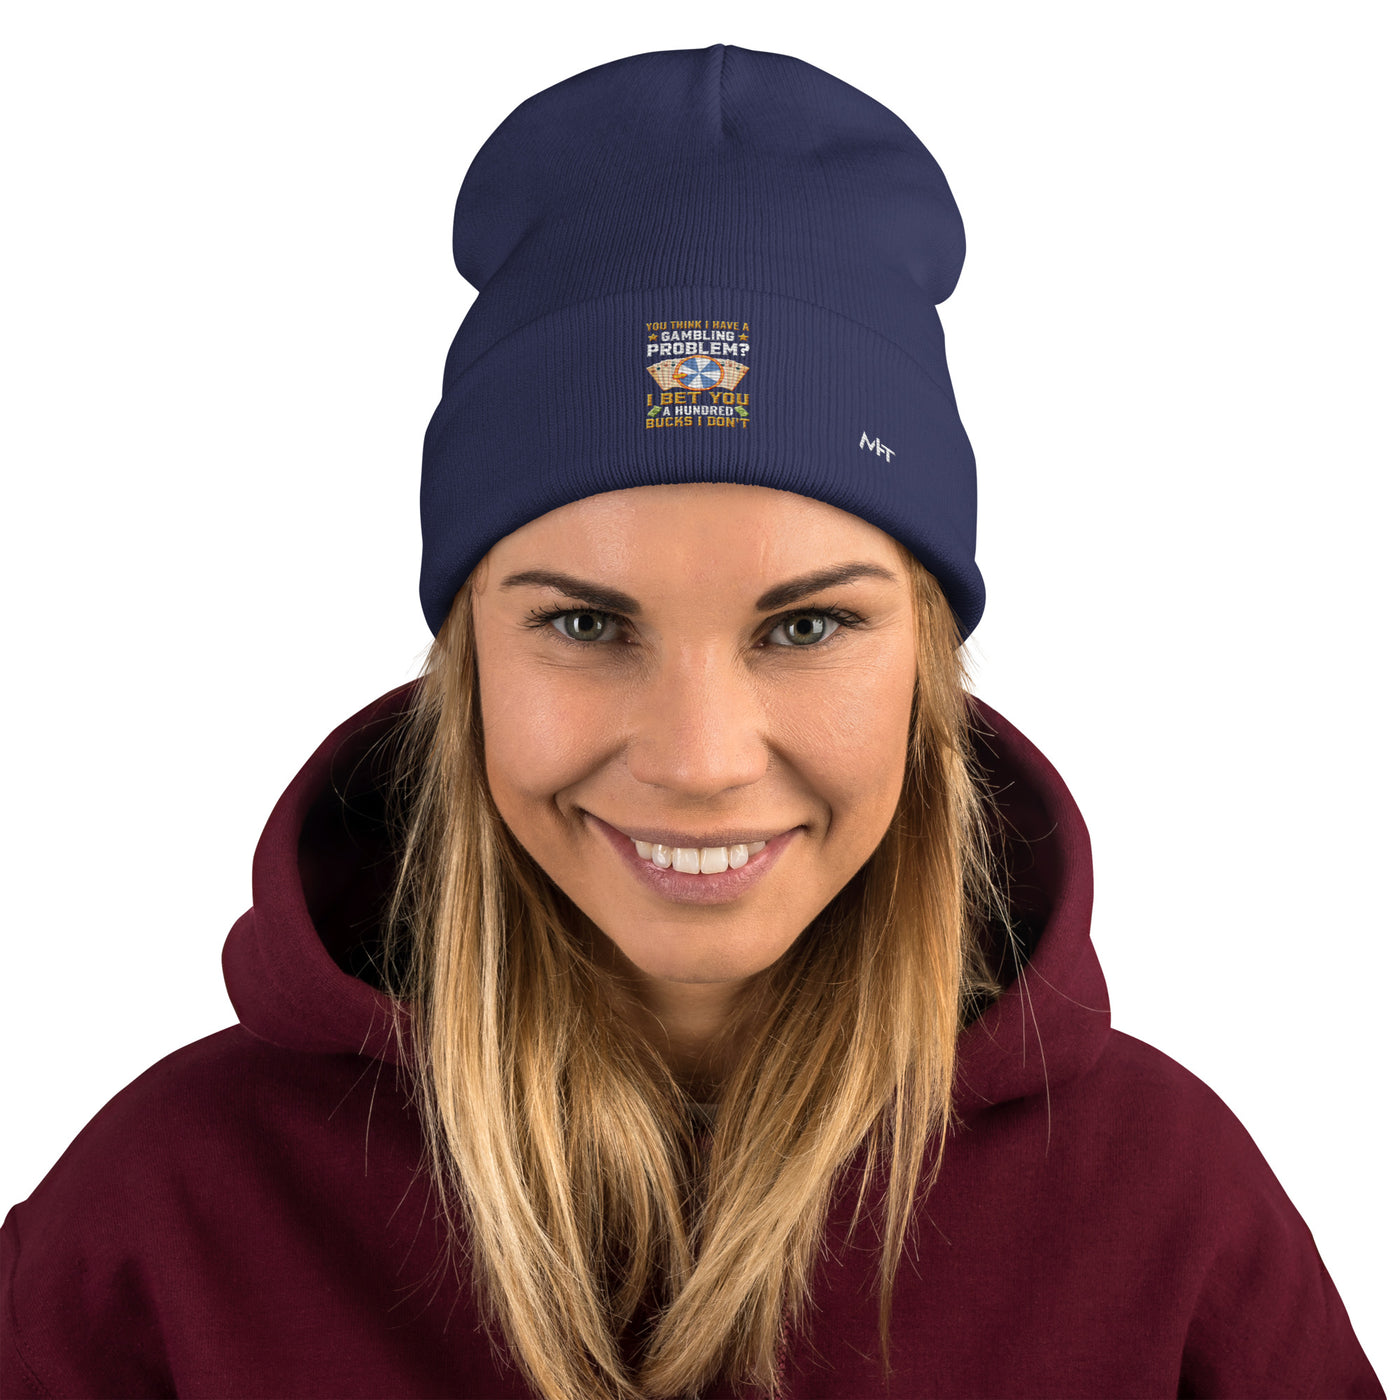 You Think I Have a Gambling Problem? I Bet you a Hundred Bucks I Don't - Embroidered Beanie